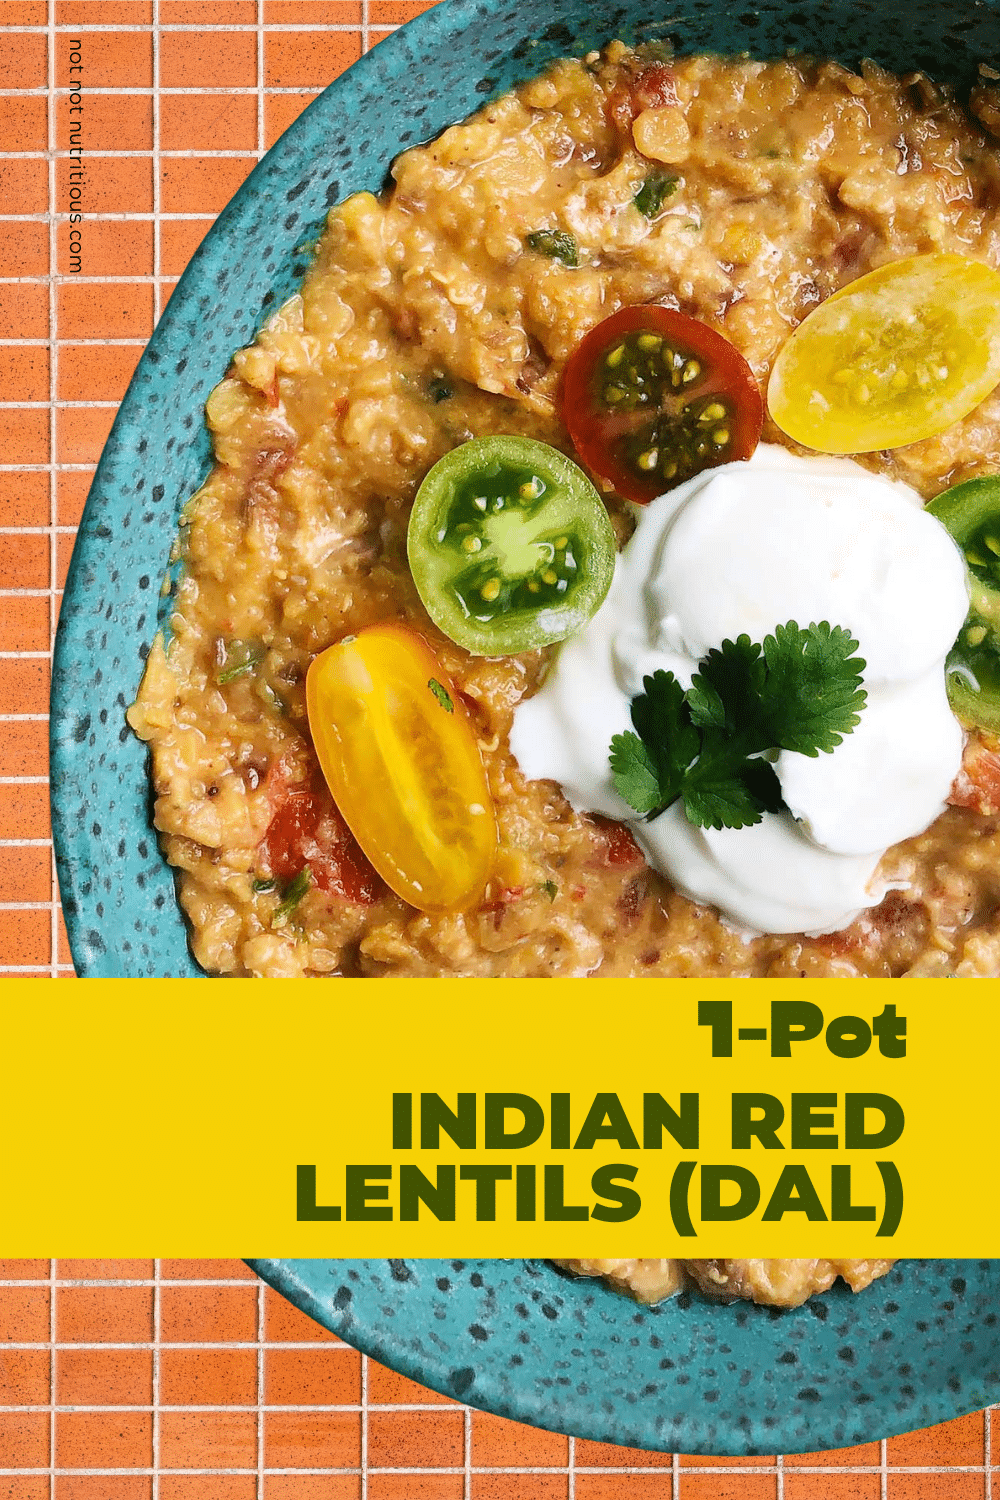 Pin for I-Pot Indian Red Lentils, with top-down view of red lentils topped with tomatoes and yogurt in a blue bowl against an orange tile background